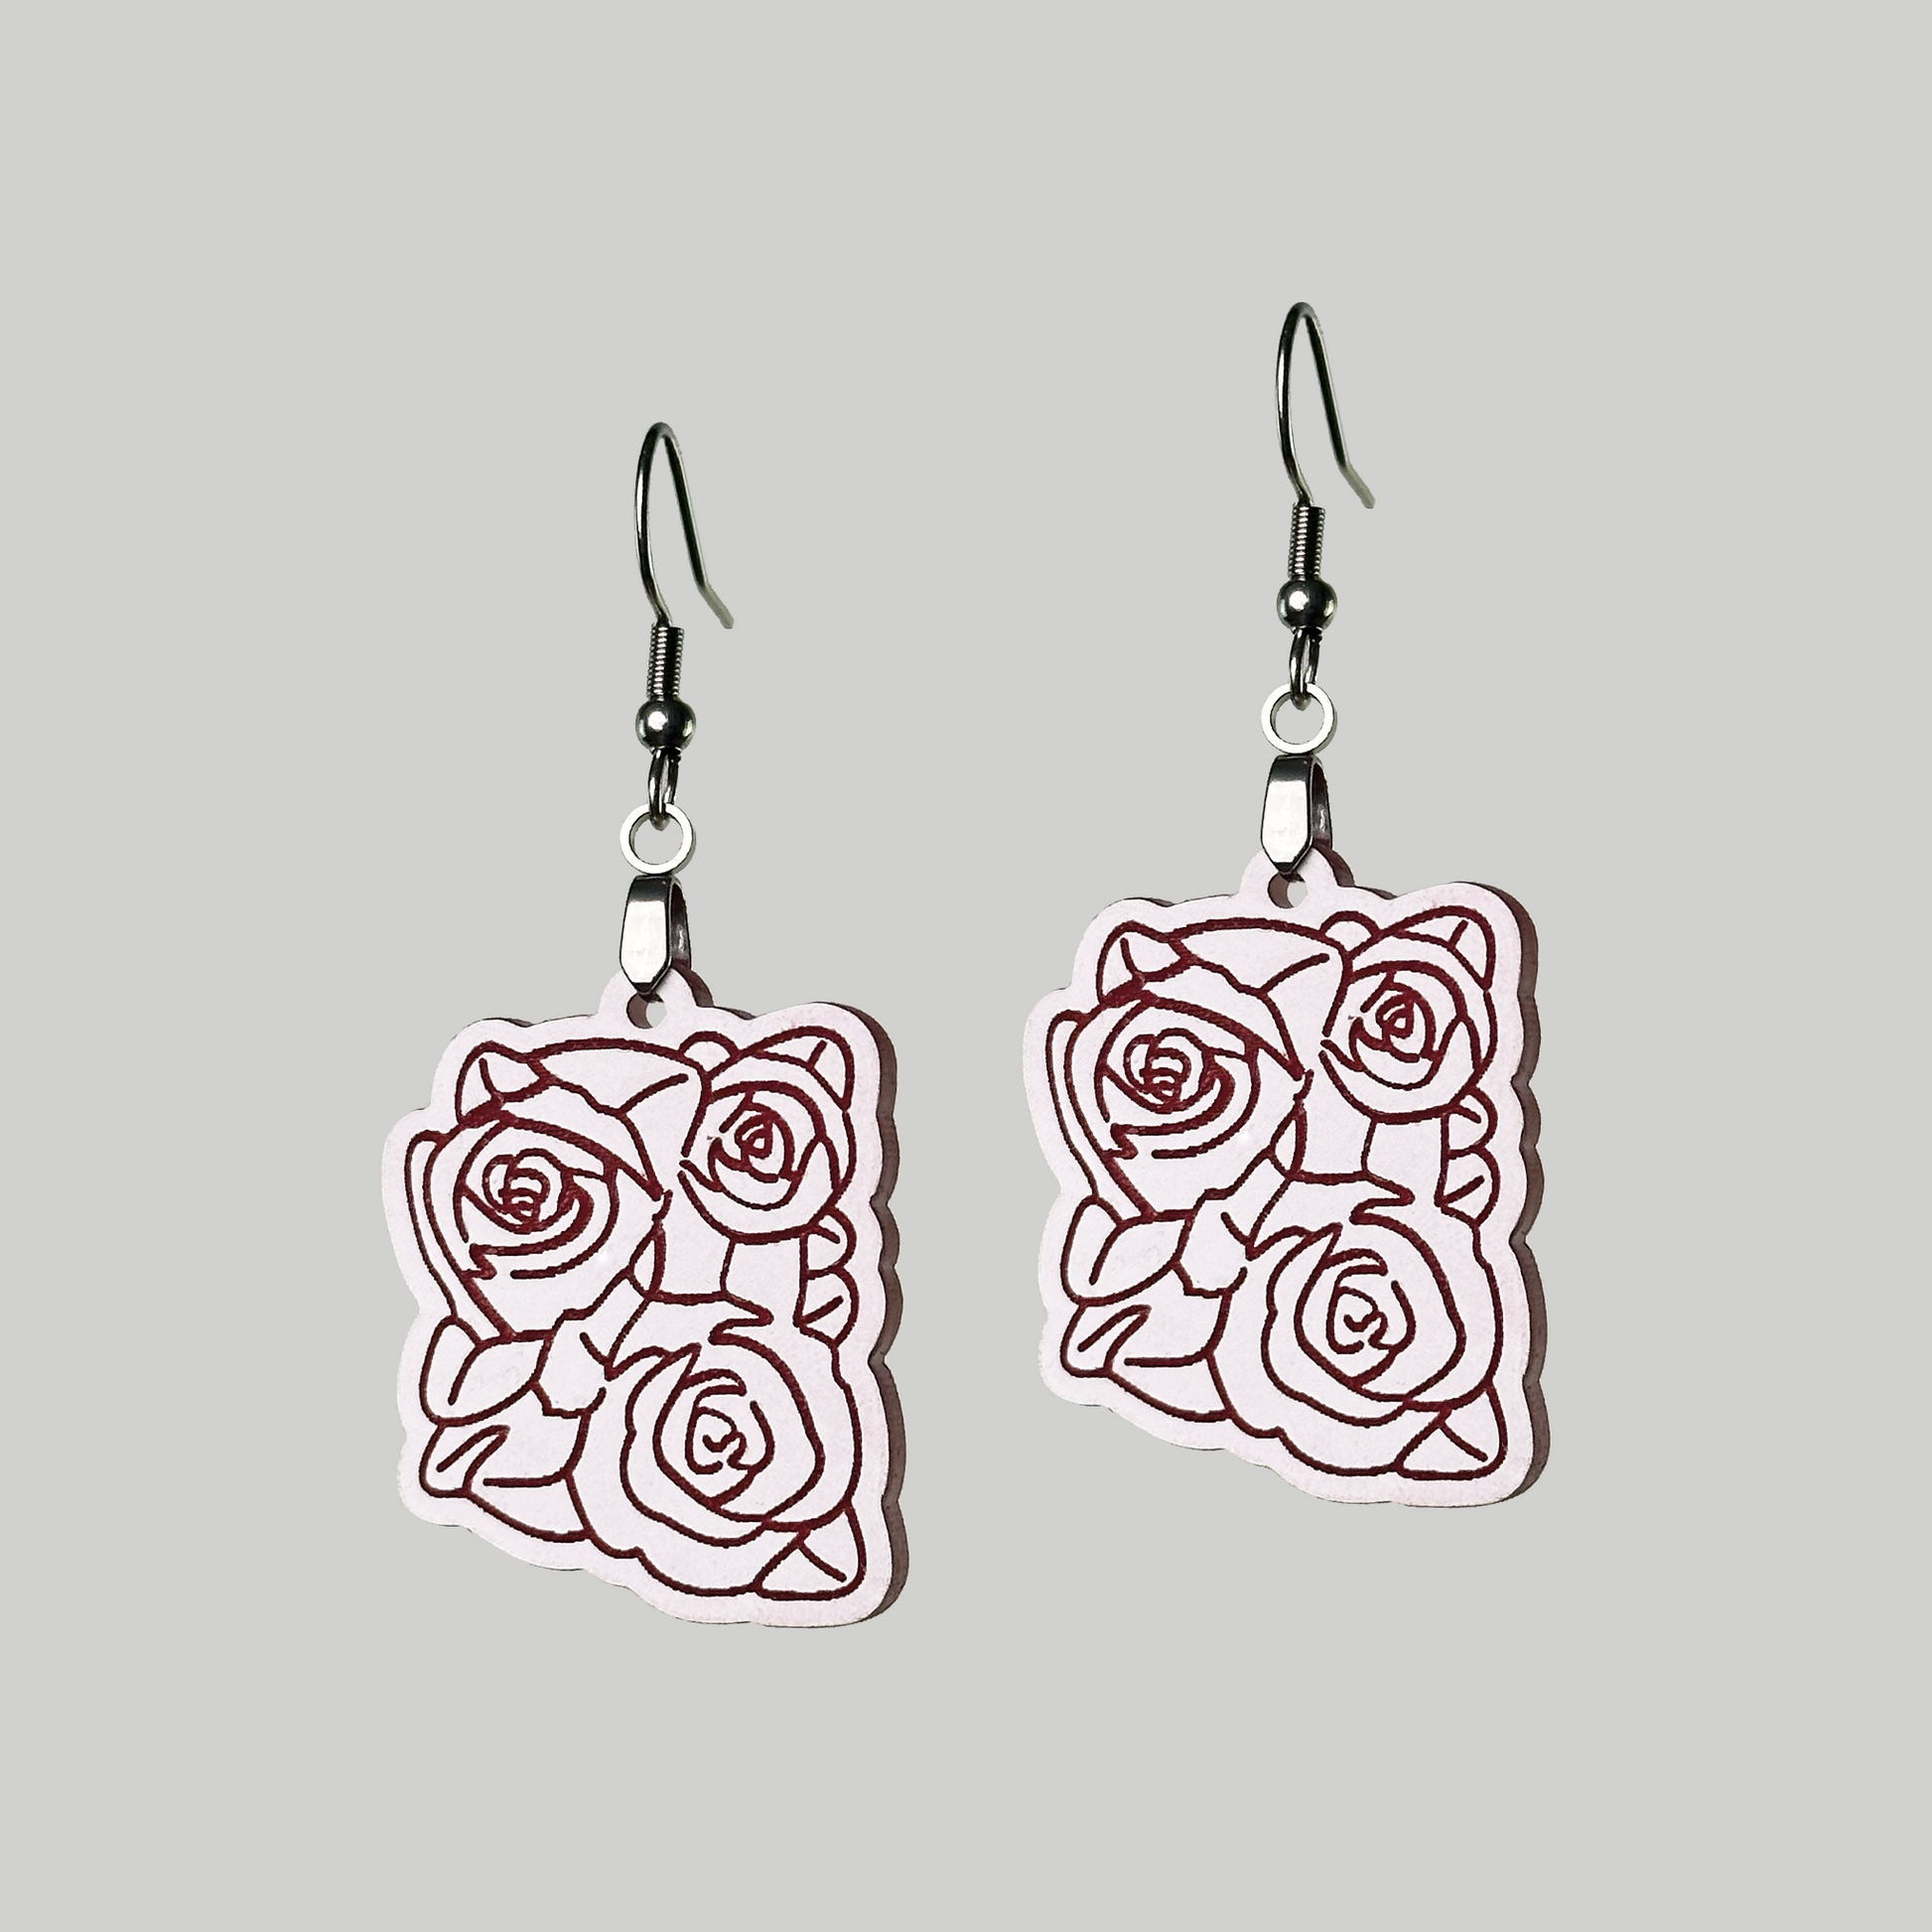 Rose Earrings: Timeless floral elegance captured in these exquisite rose-inspired accessories.